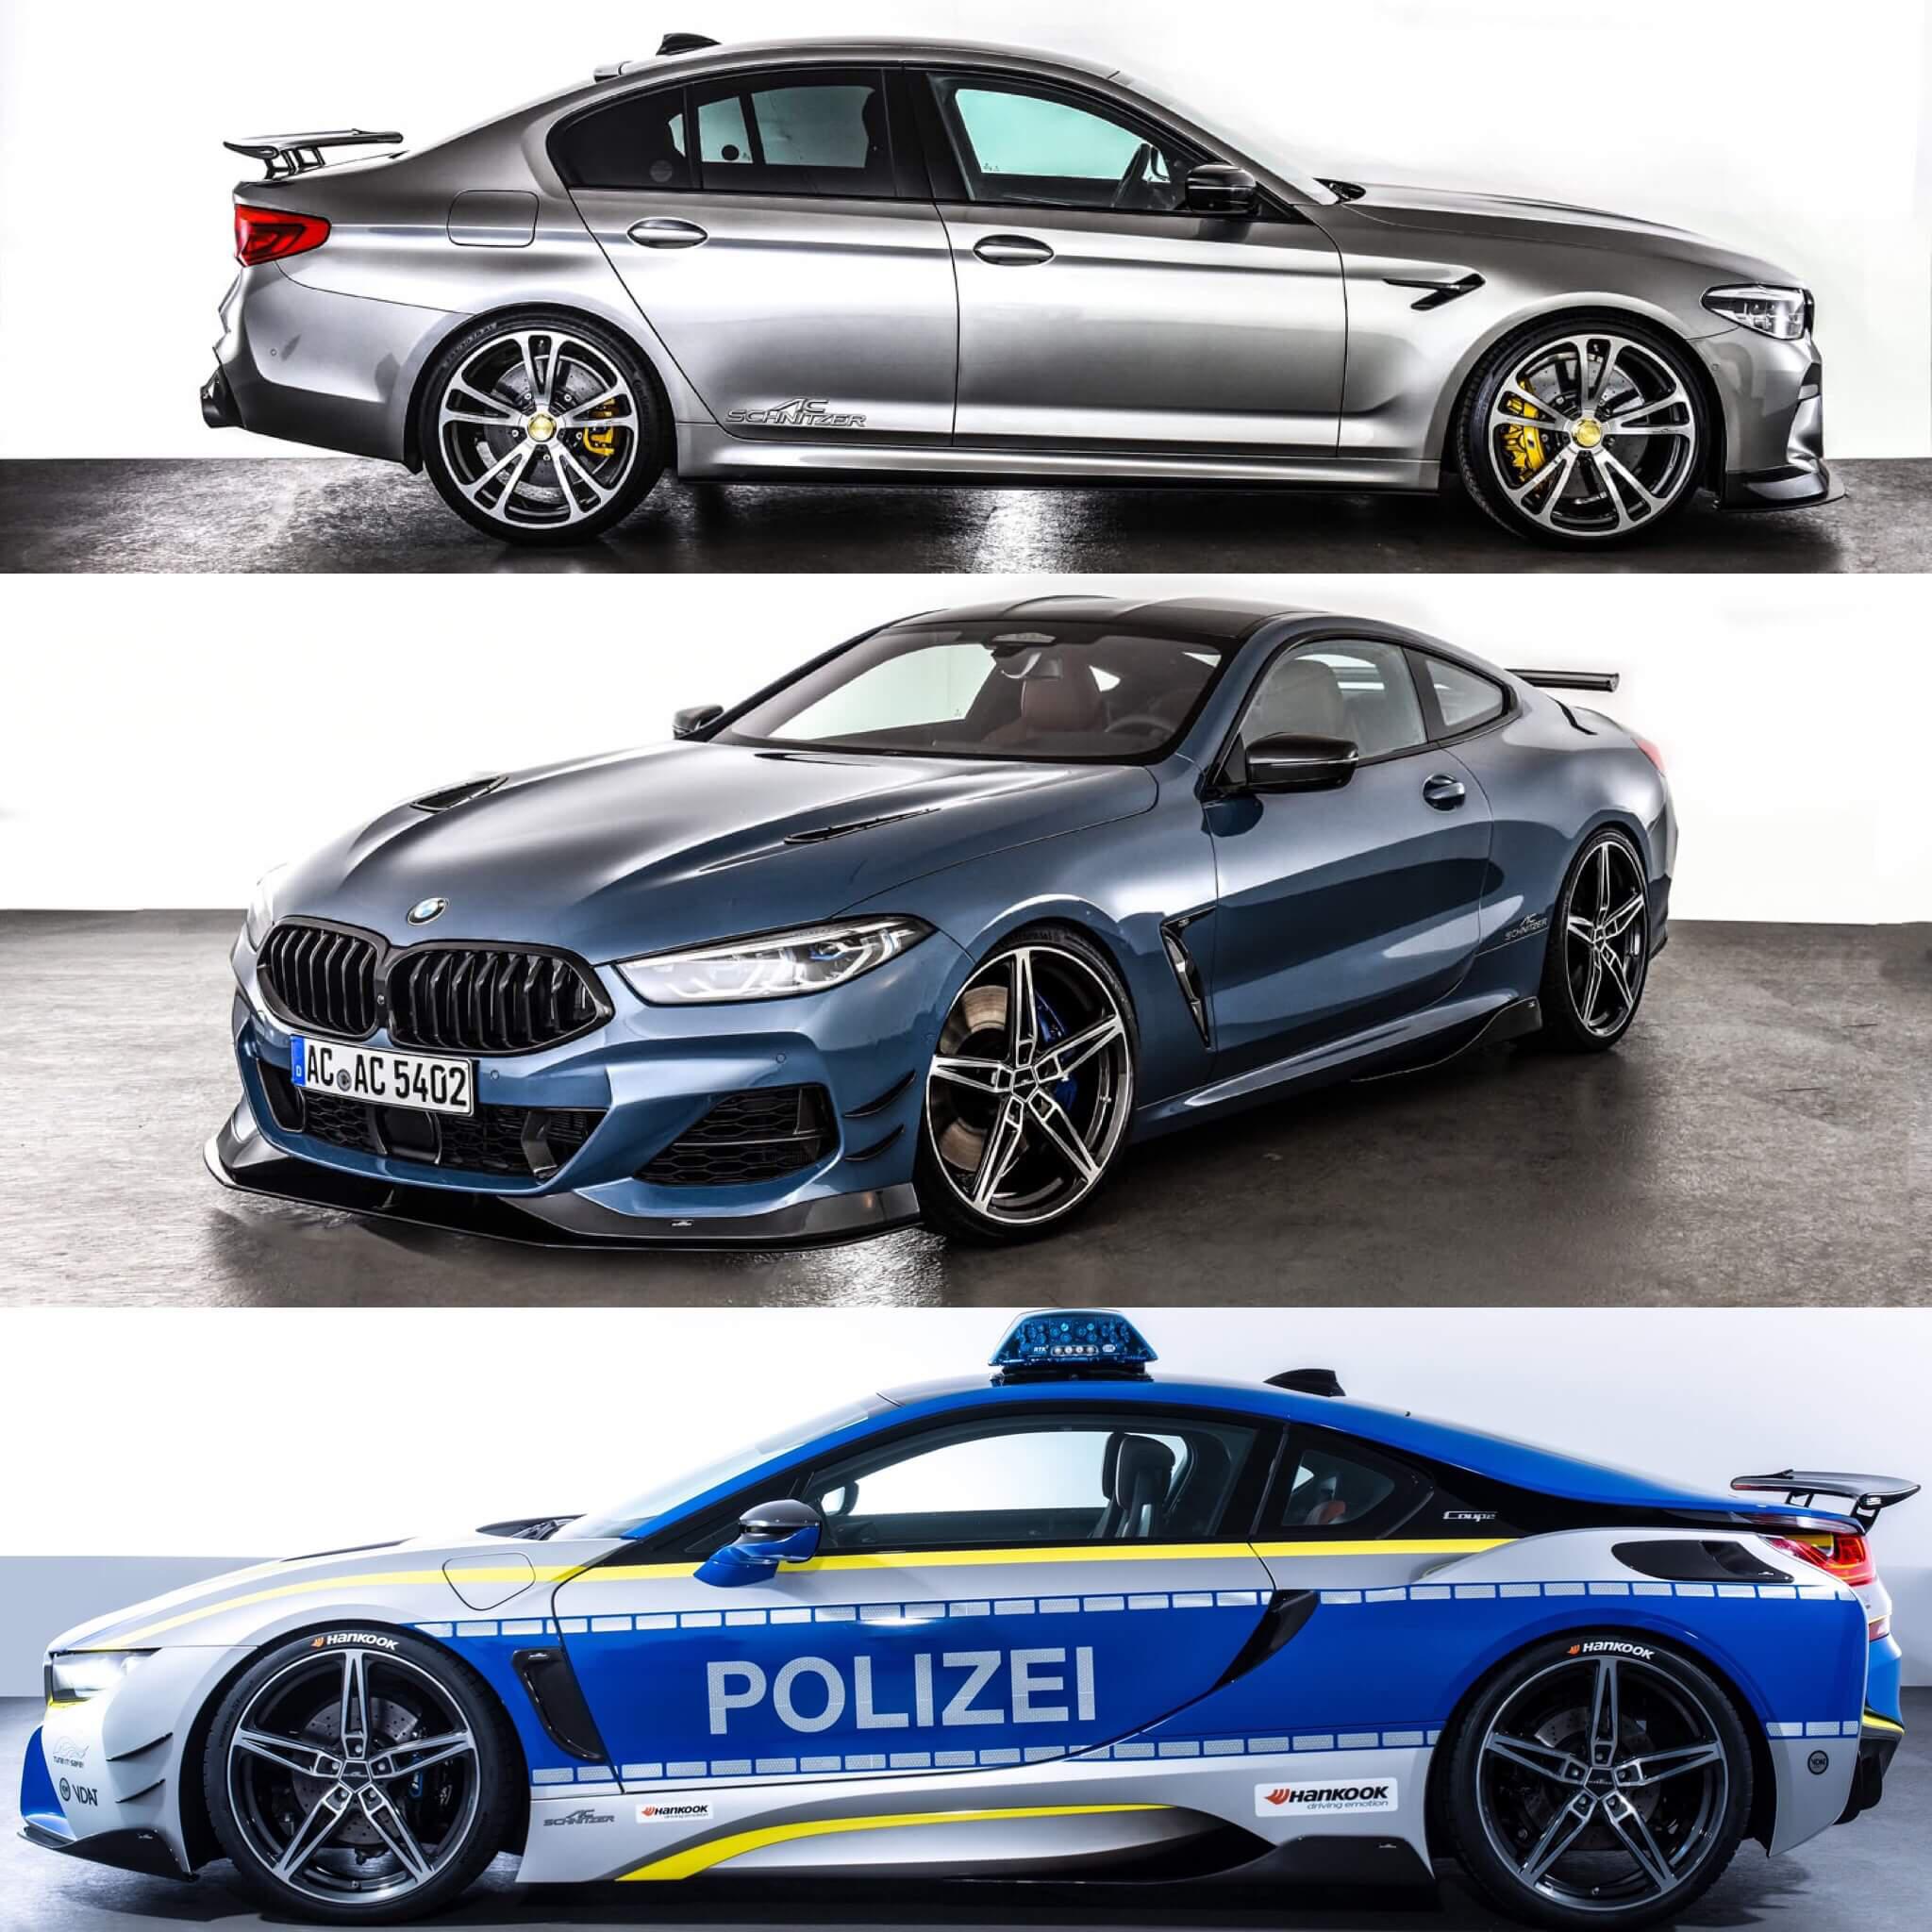 Ac Schnitzer Presented 3 New Tuned Bmw Models At Essen Motor Show